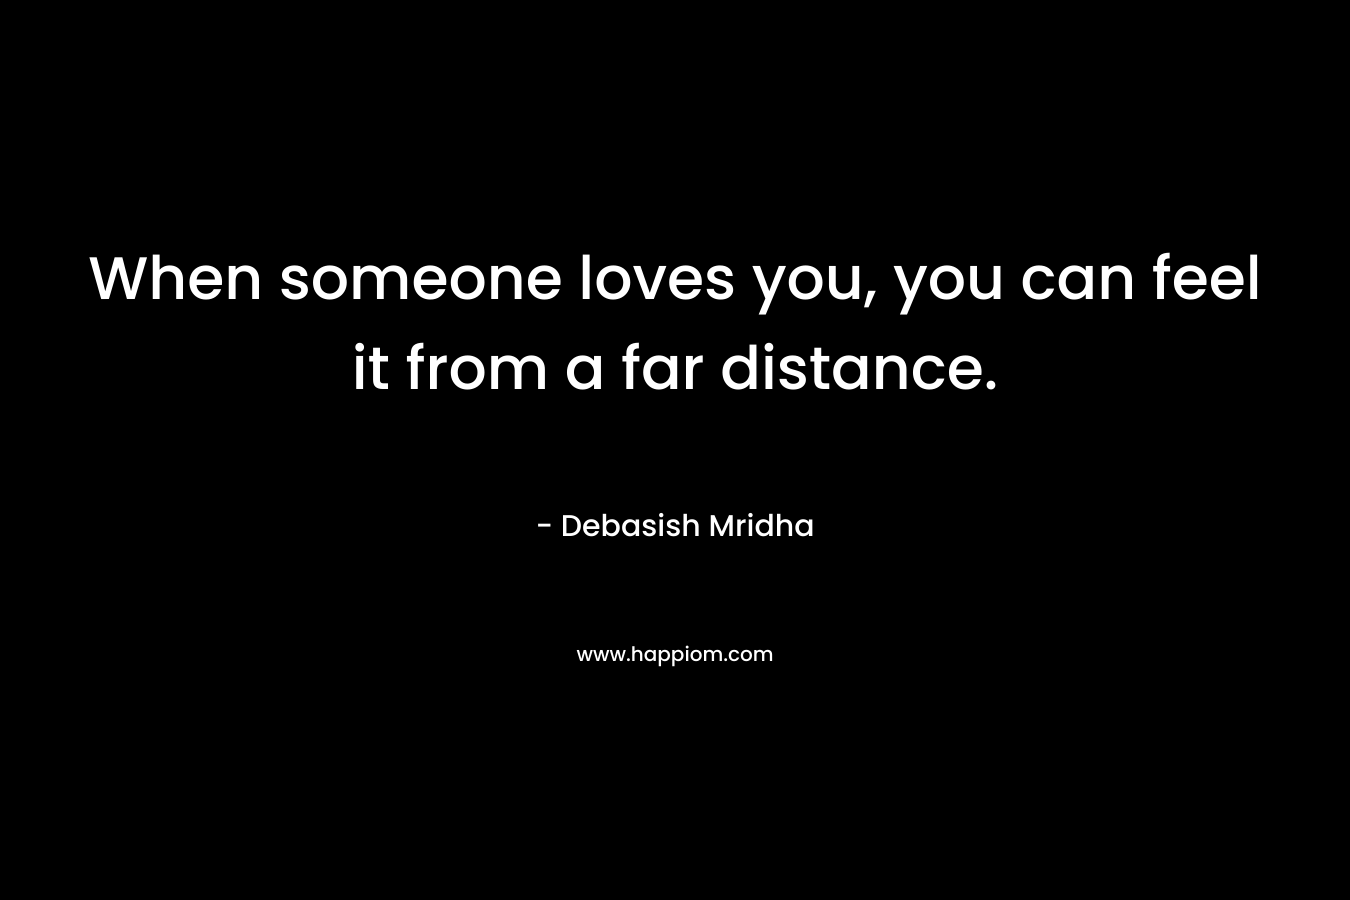 When someone loves you, you can feel it from a far distance.